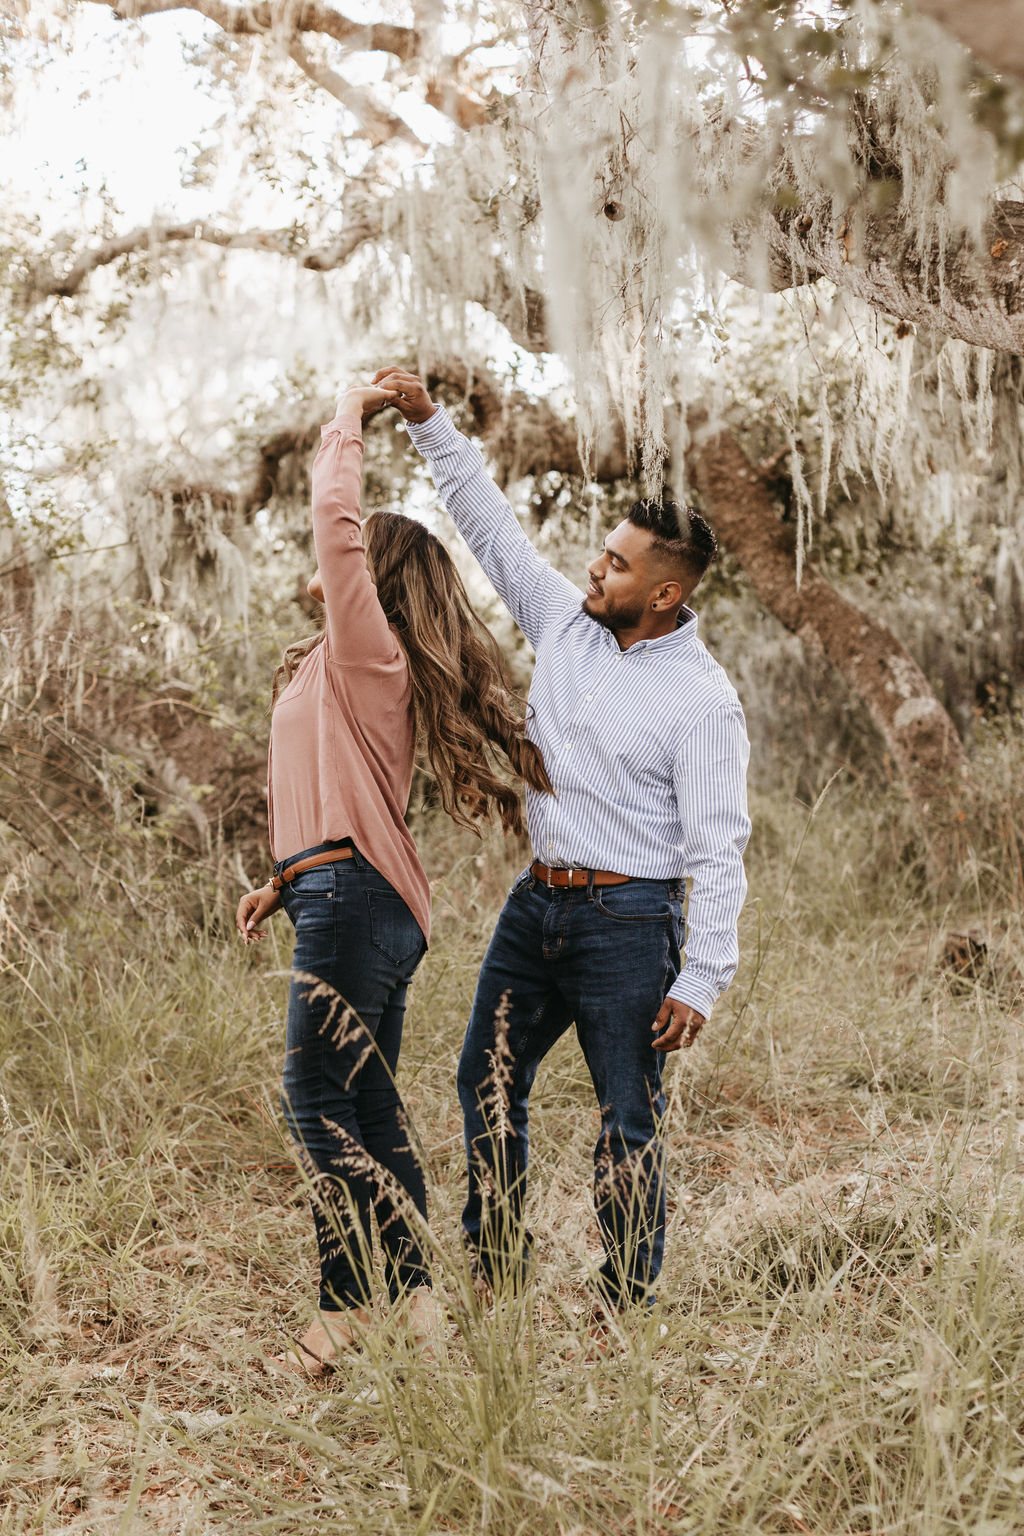 What To Wear For Your Engagement Photos